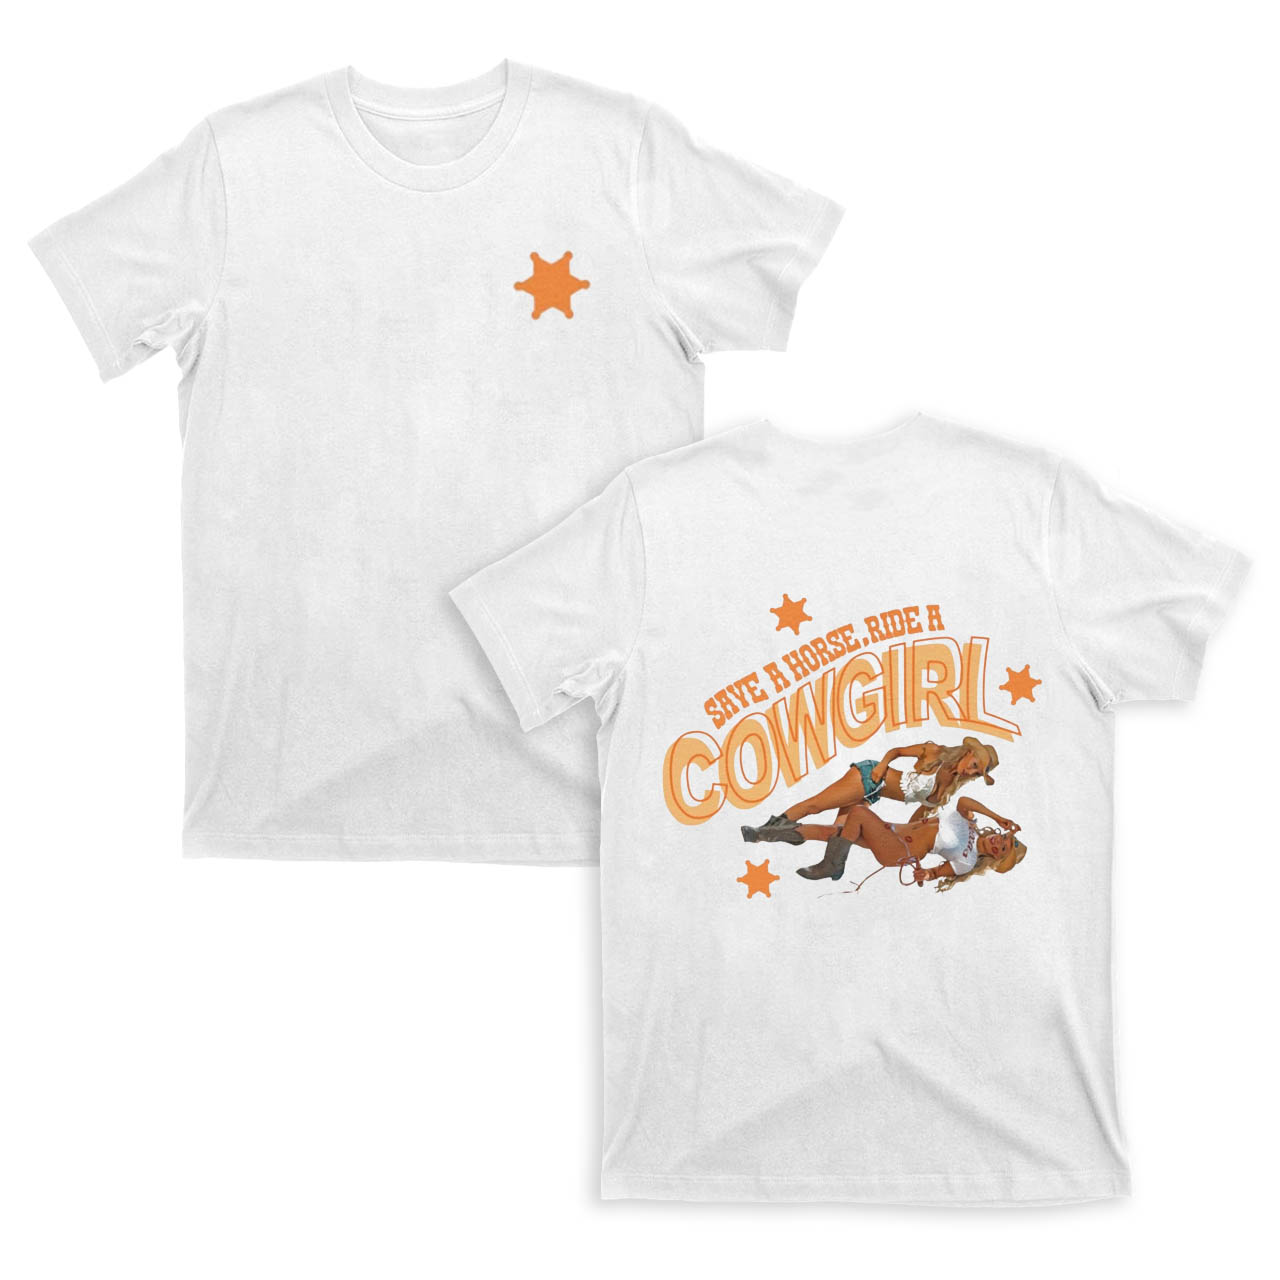 Save A Horse Ride A Cowgirl T-Shirts